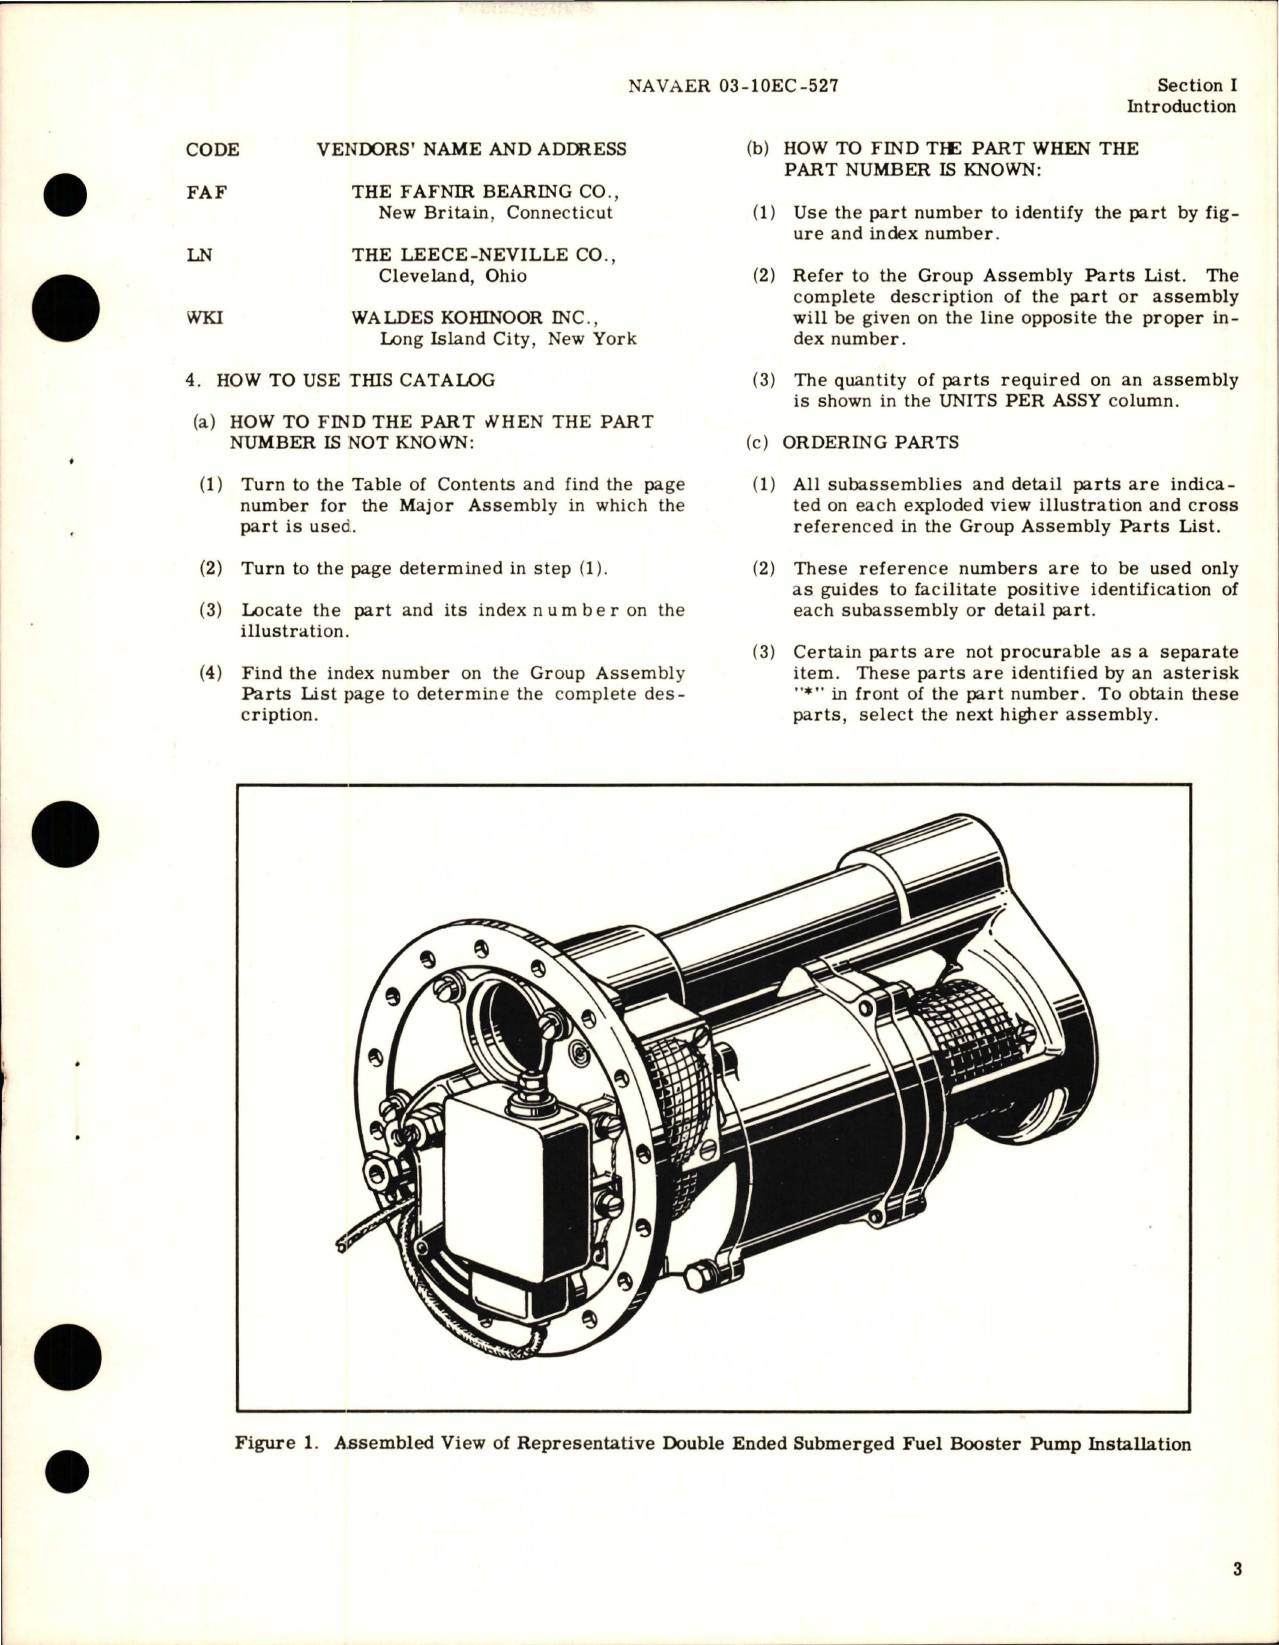 Sample page 5 from AirCorps Library document: Illustrated Parts Breakdown for Double Ended Fuel Booster Pump - TB107400, TB107400-1, TB107400-2, and TB107400-3